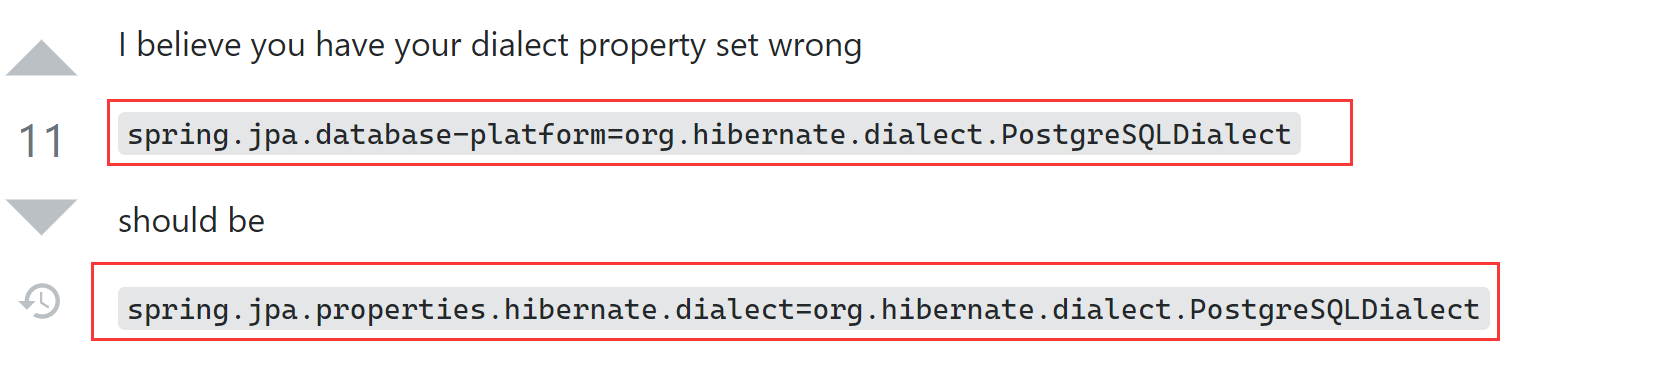 Access to DialectResolutionInfo cannot be null when 'hibernate.dialect' not set。